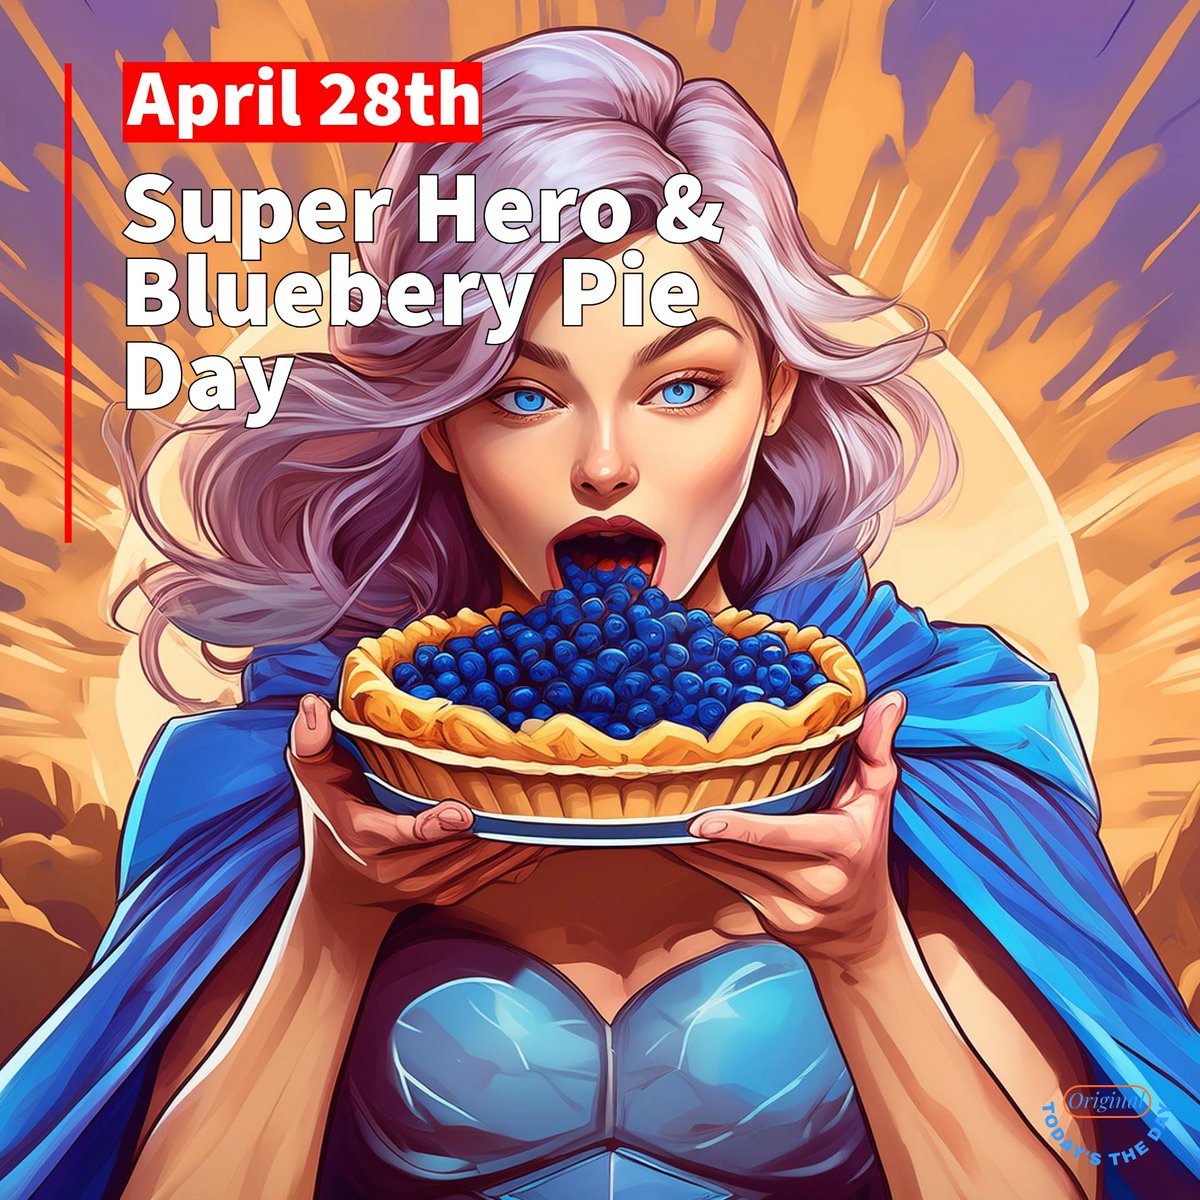 Have a fun day today! It's #SuperheroDay  and #BlueberryPieDay